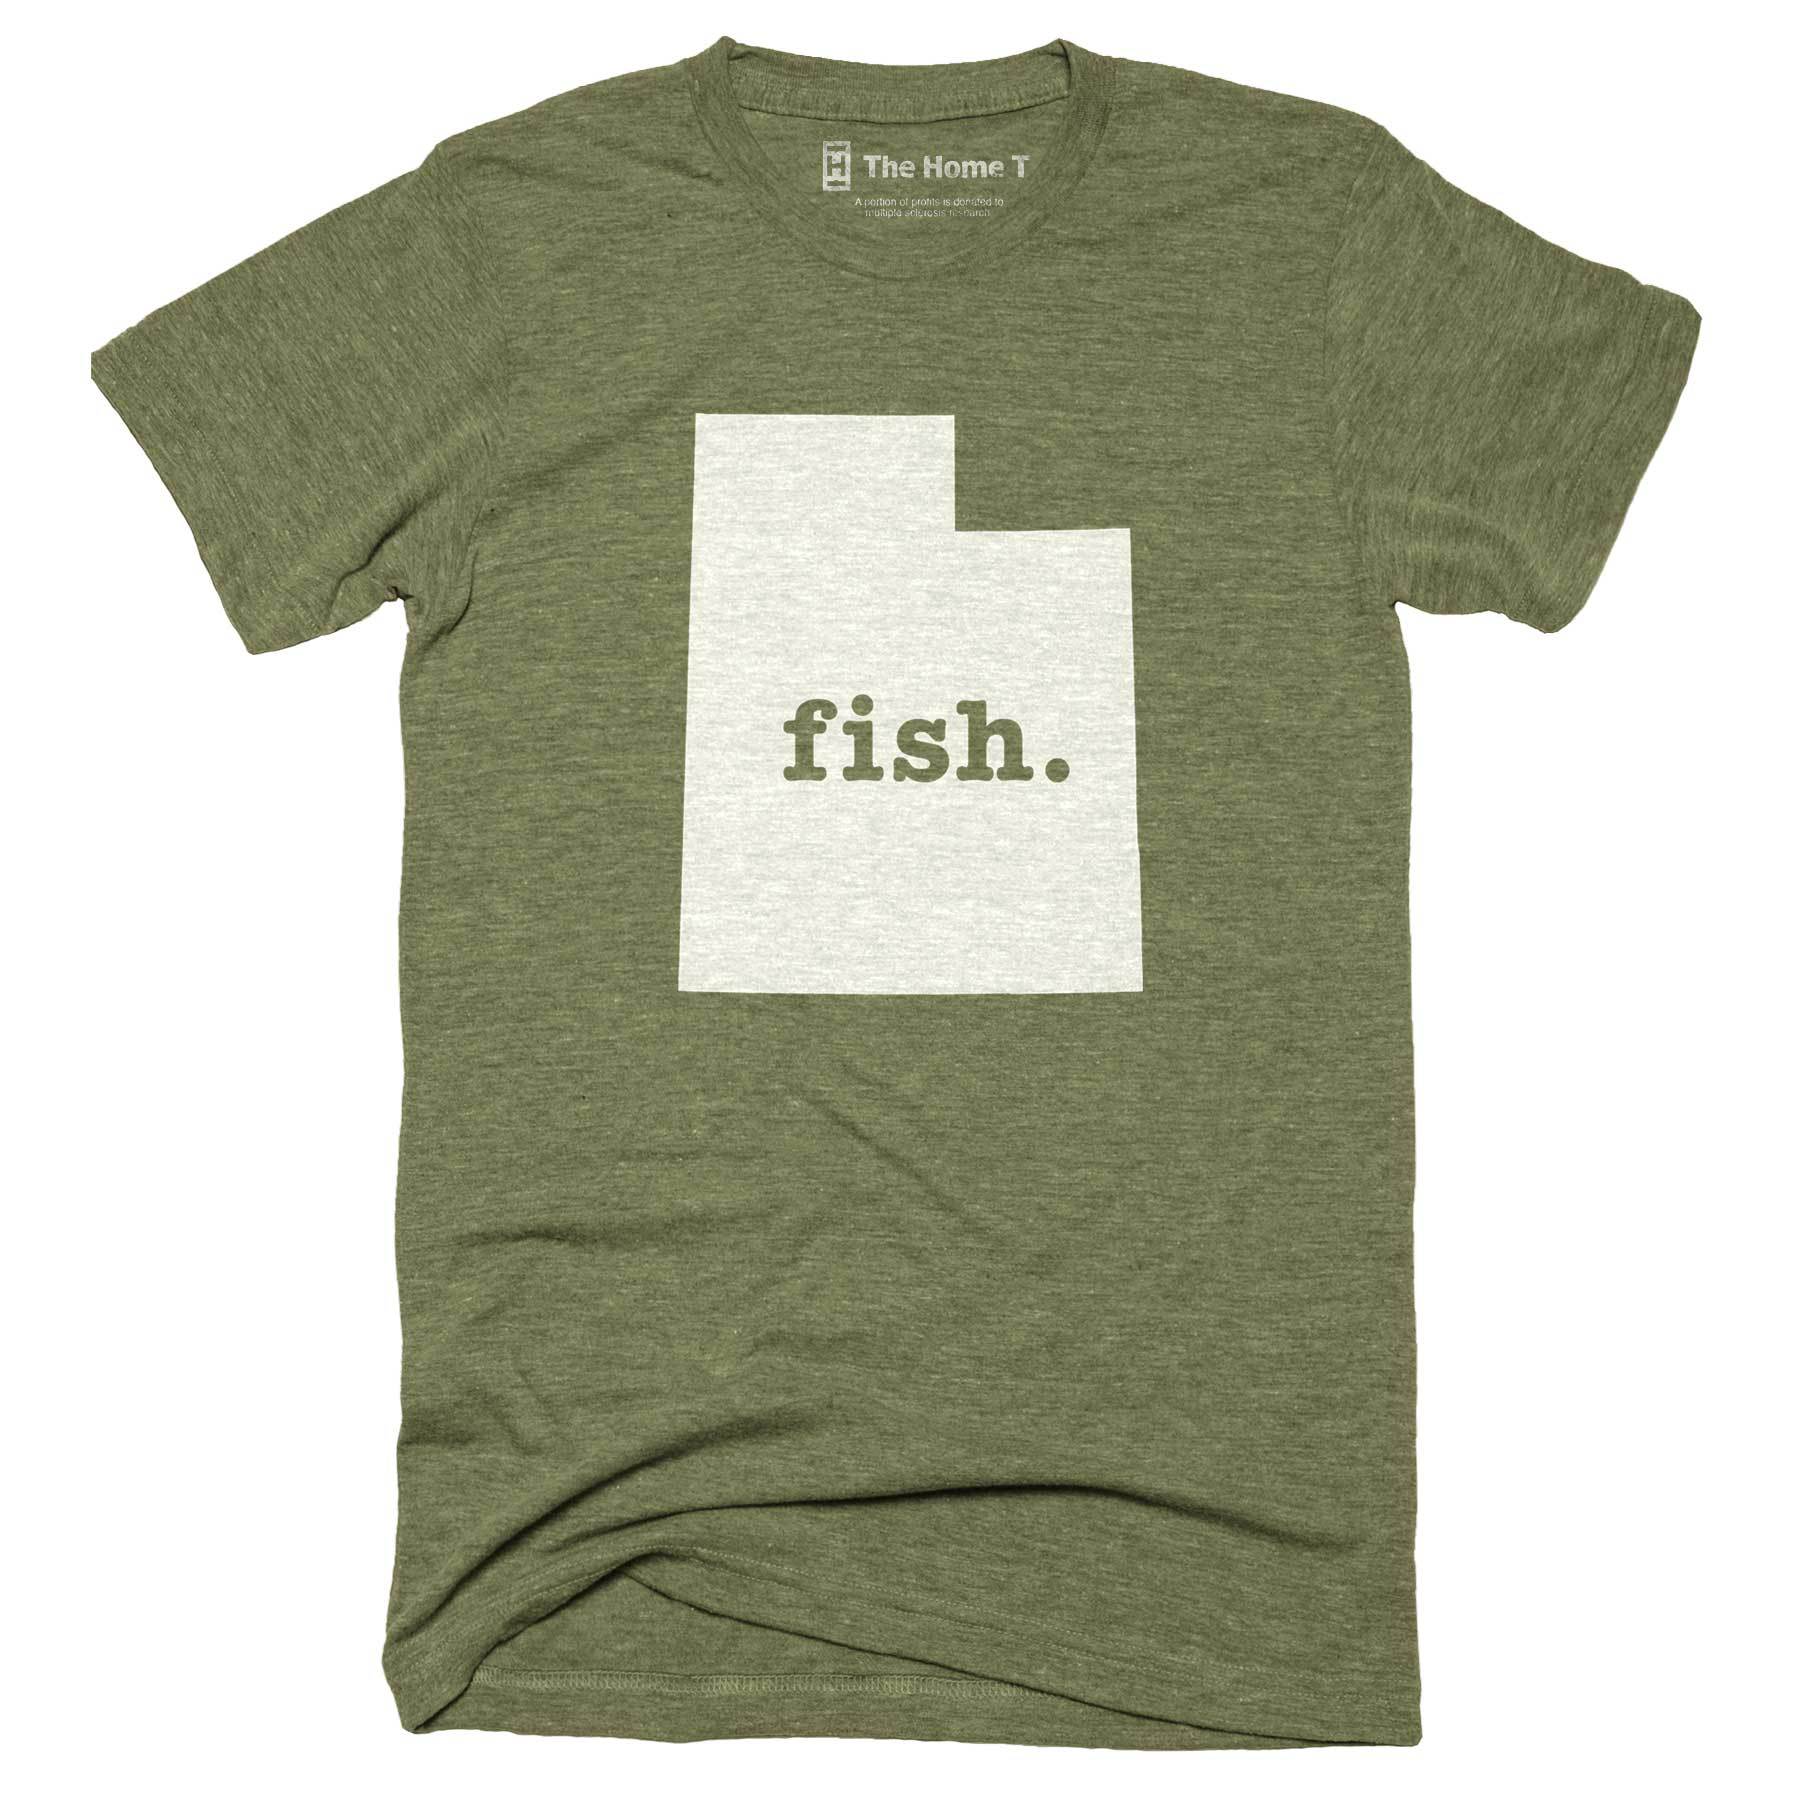 Utah Fish Home T-Shirt Outdoor Collection The Home T XXL Army Green